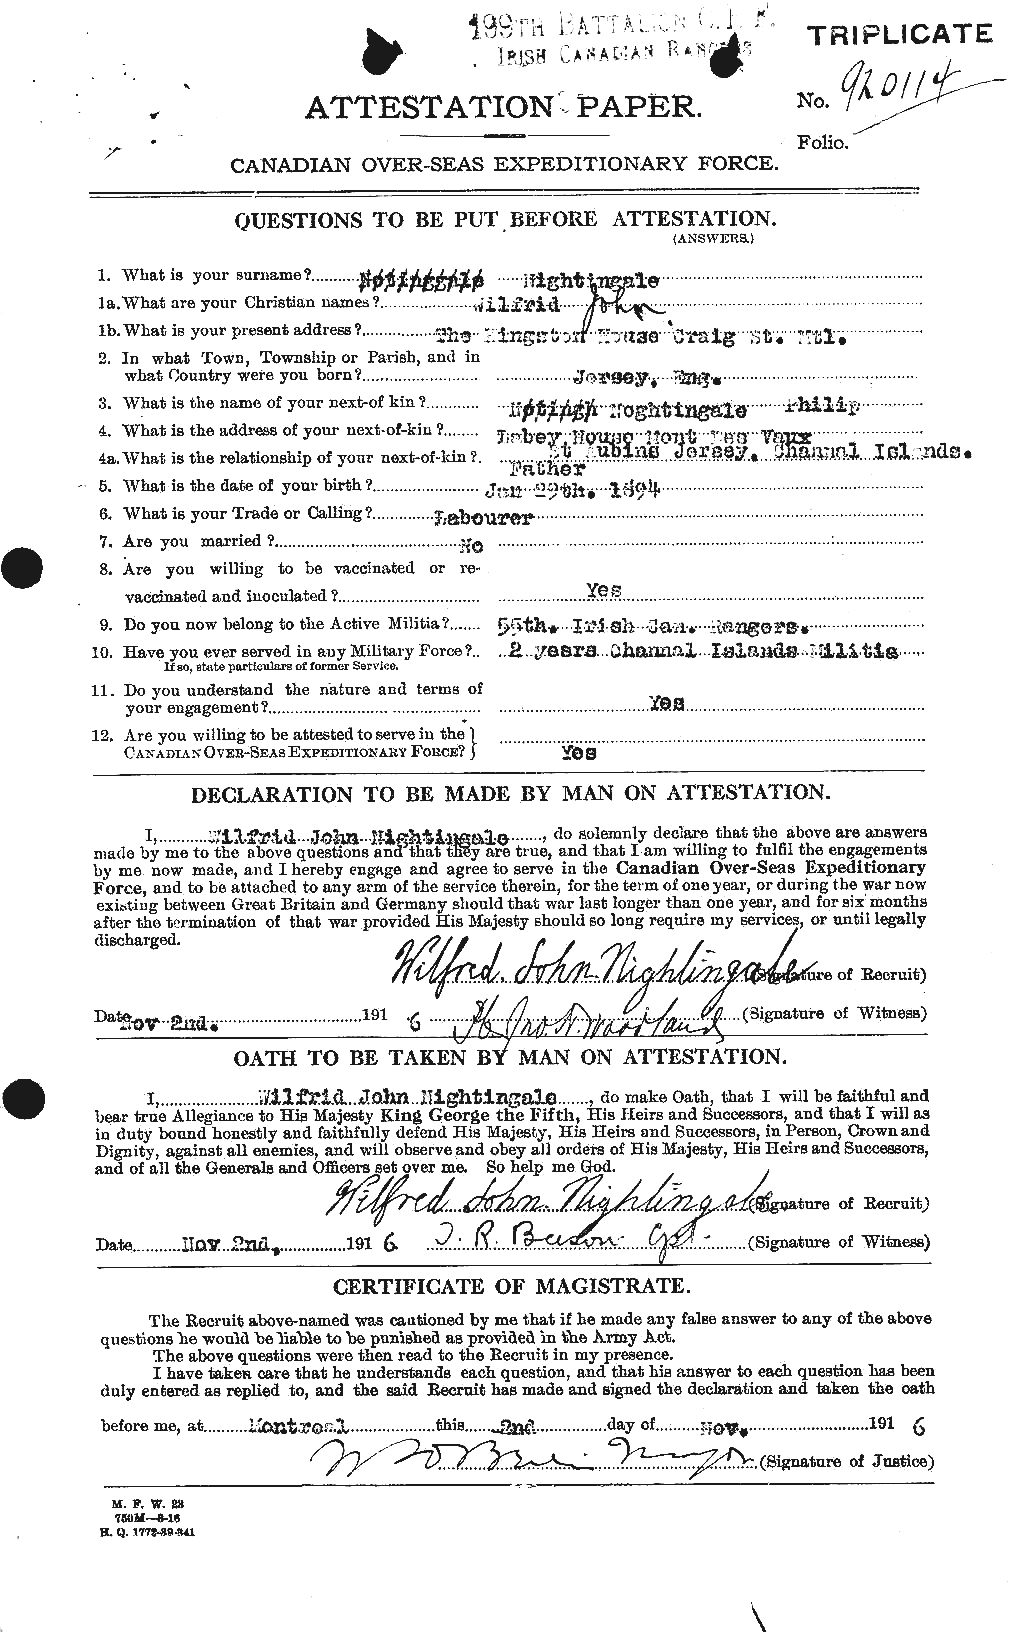 Personnel Records of the First World War - CEF 555220a